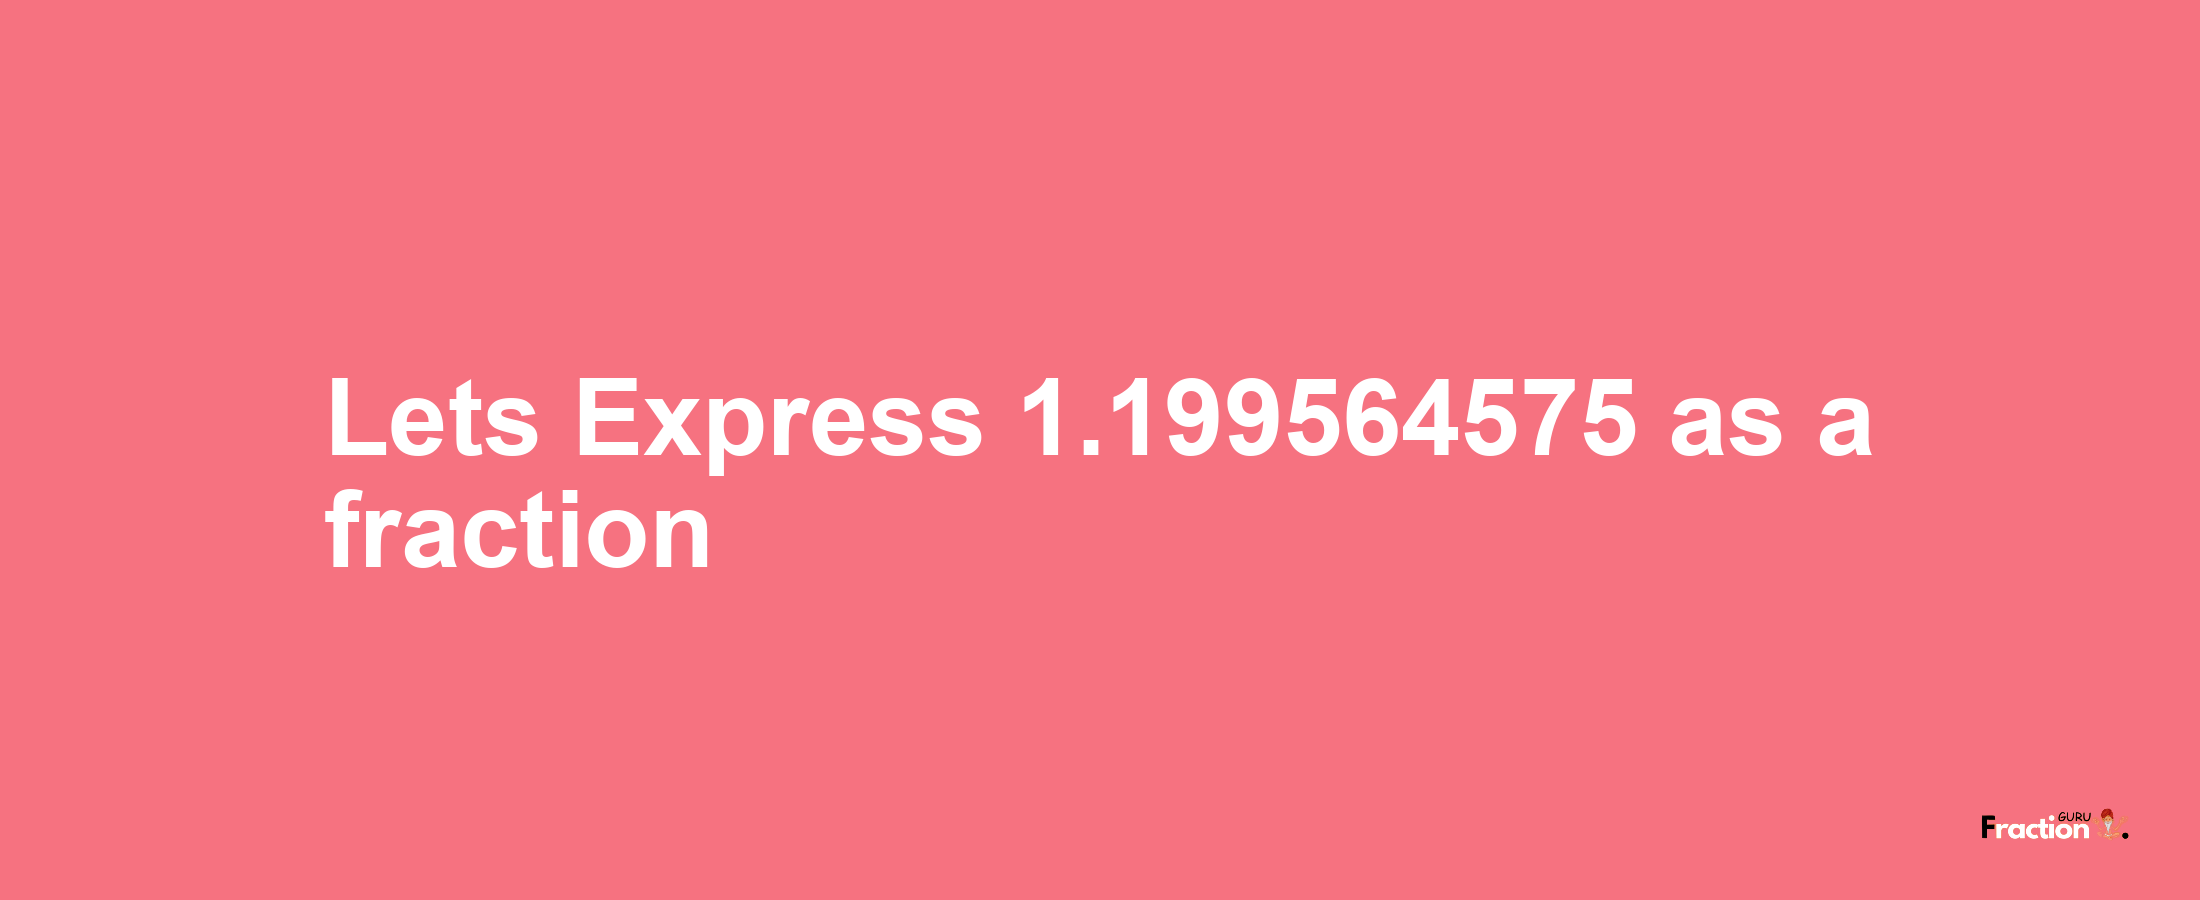 Lets Express 1.199564575 as afraction